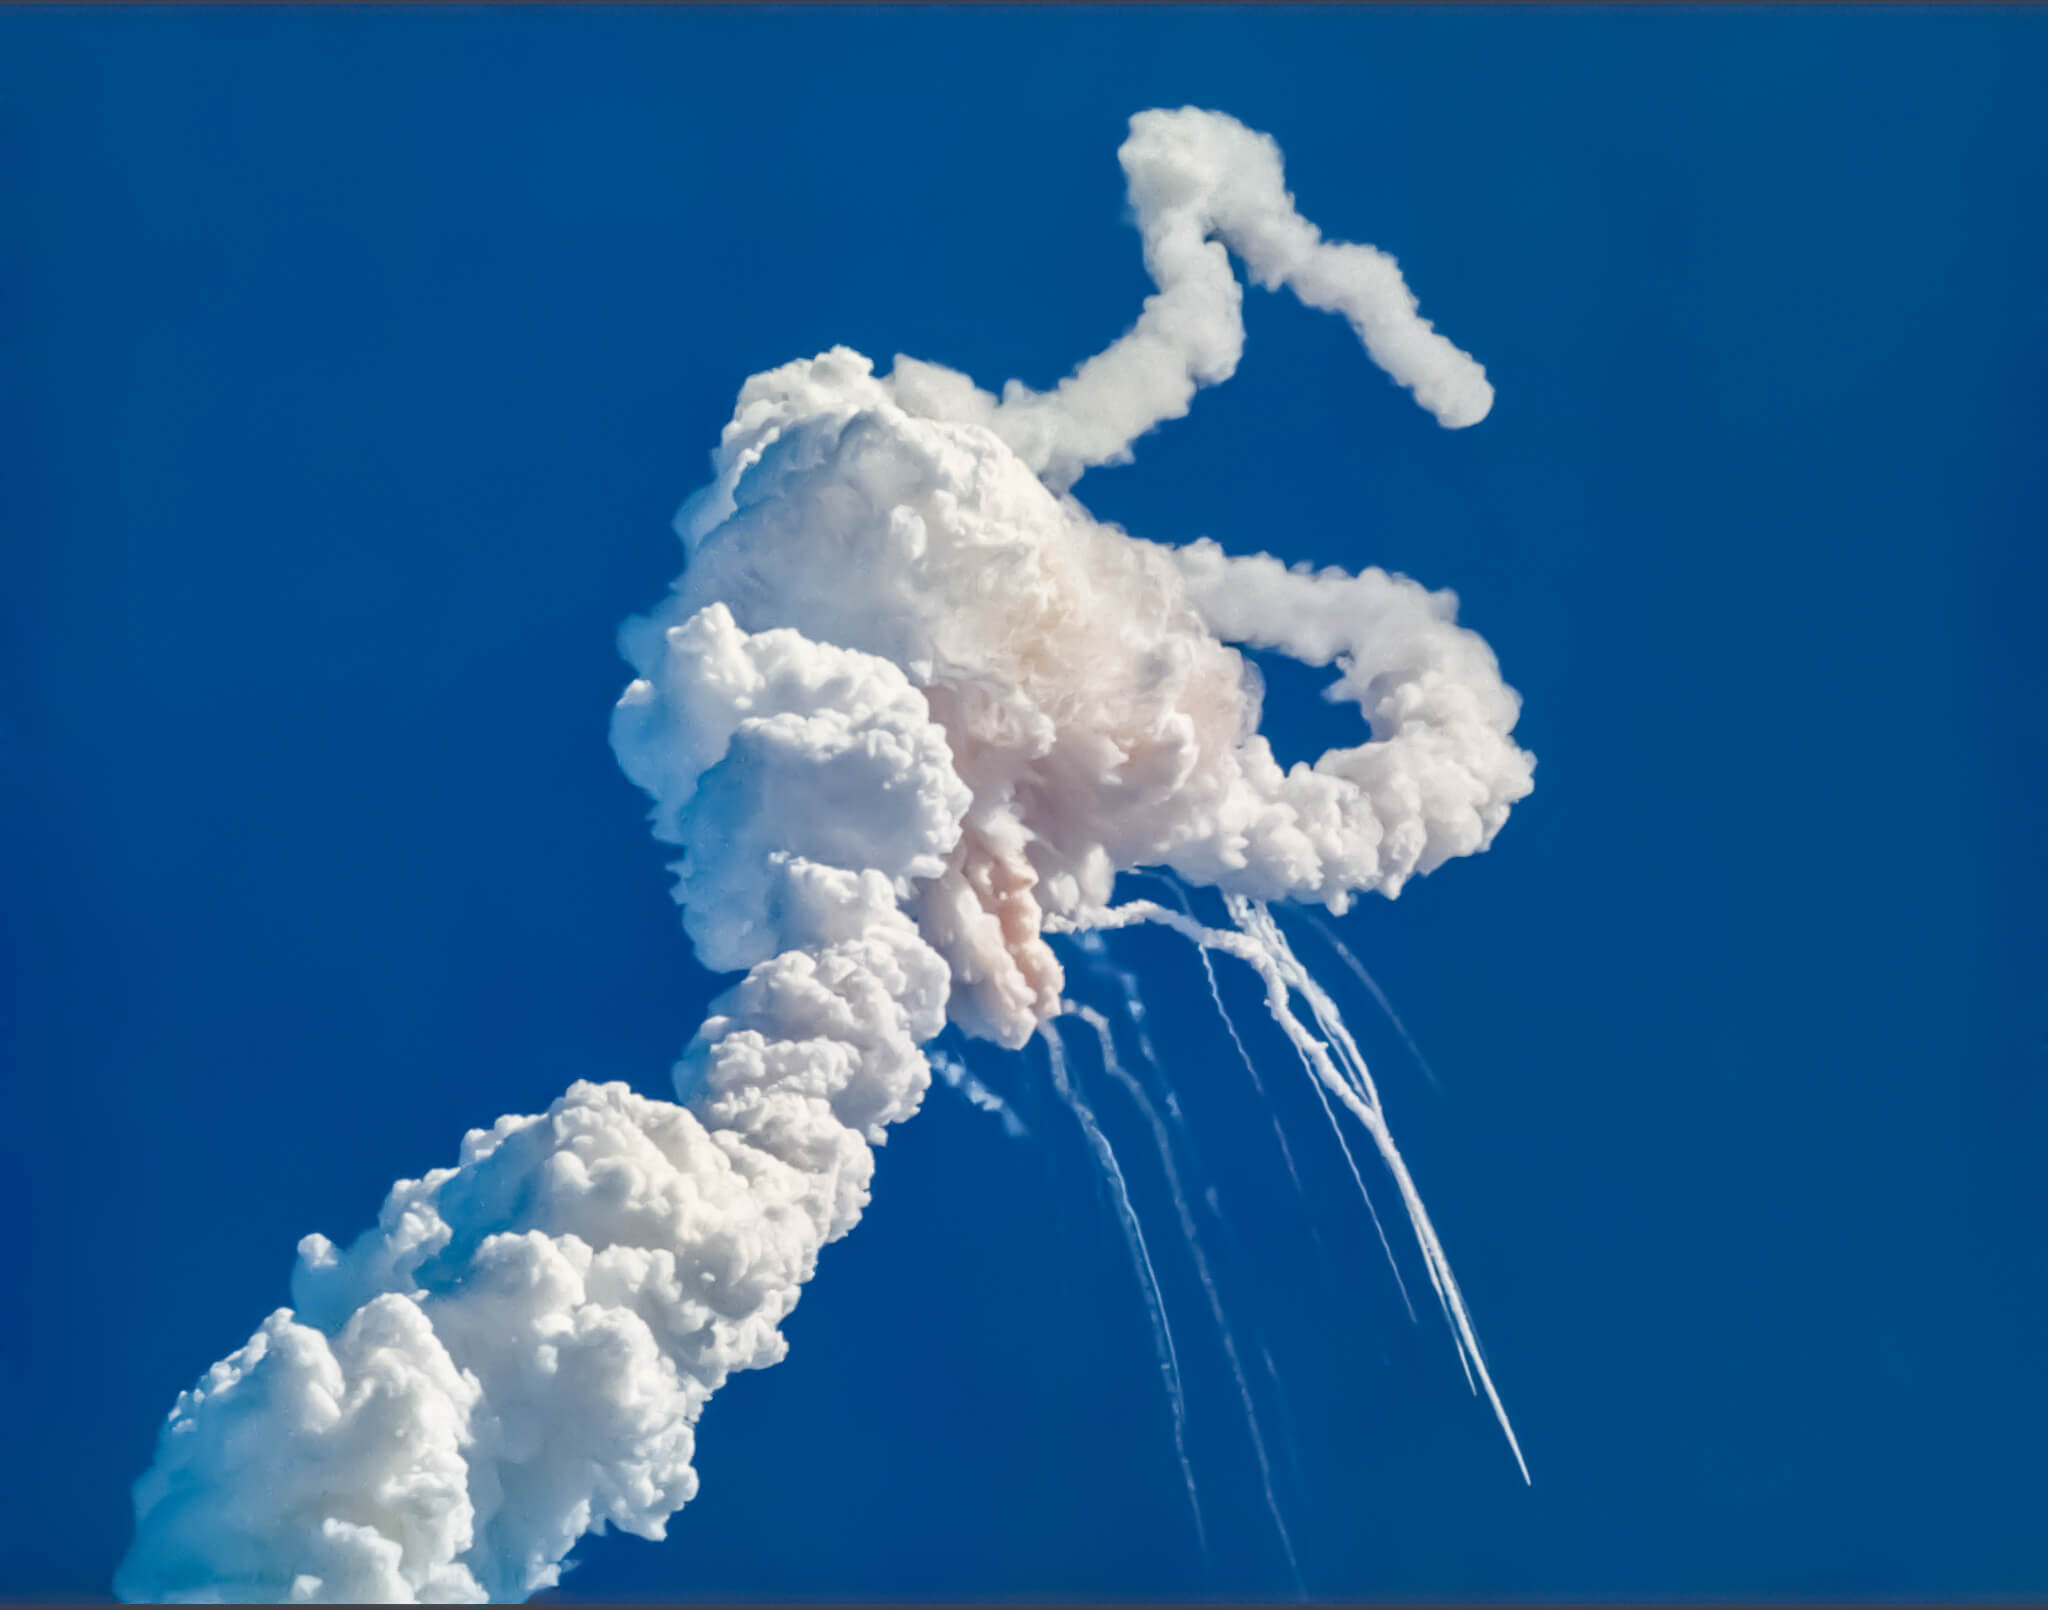 On June 9, 1986, The Rogers Commission released its report on the Challenger disaster, criticizing NASA and rocket-builder Morton Thiokol for management problems leading to the explosion that claimed the lives of seven astronauts.